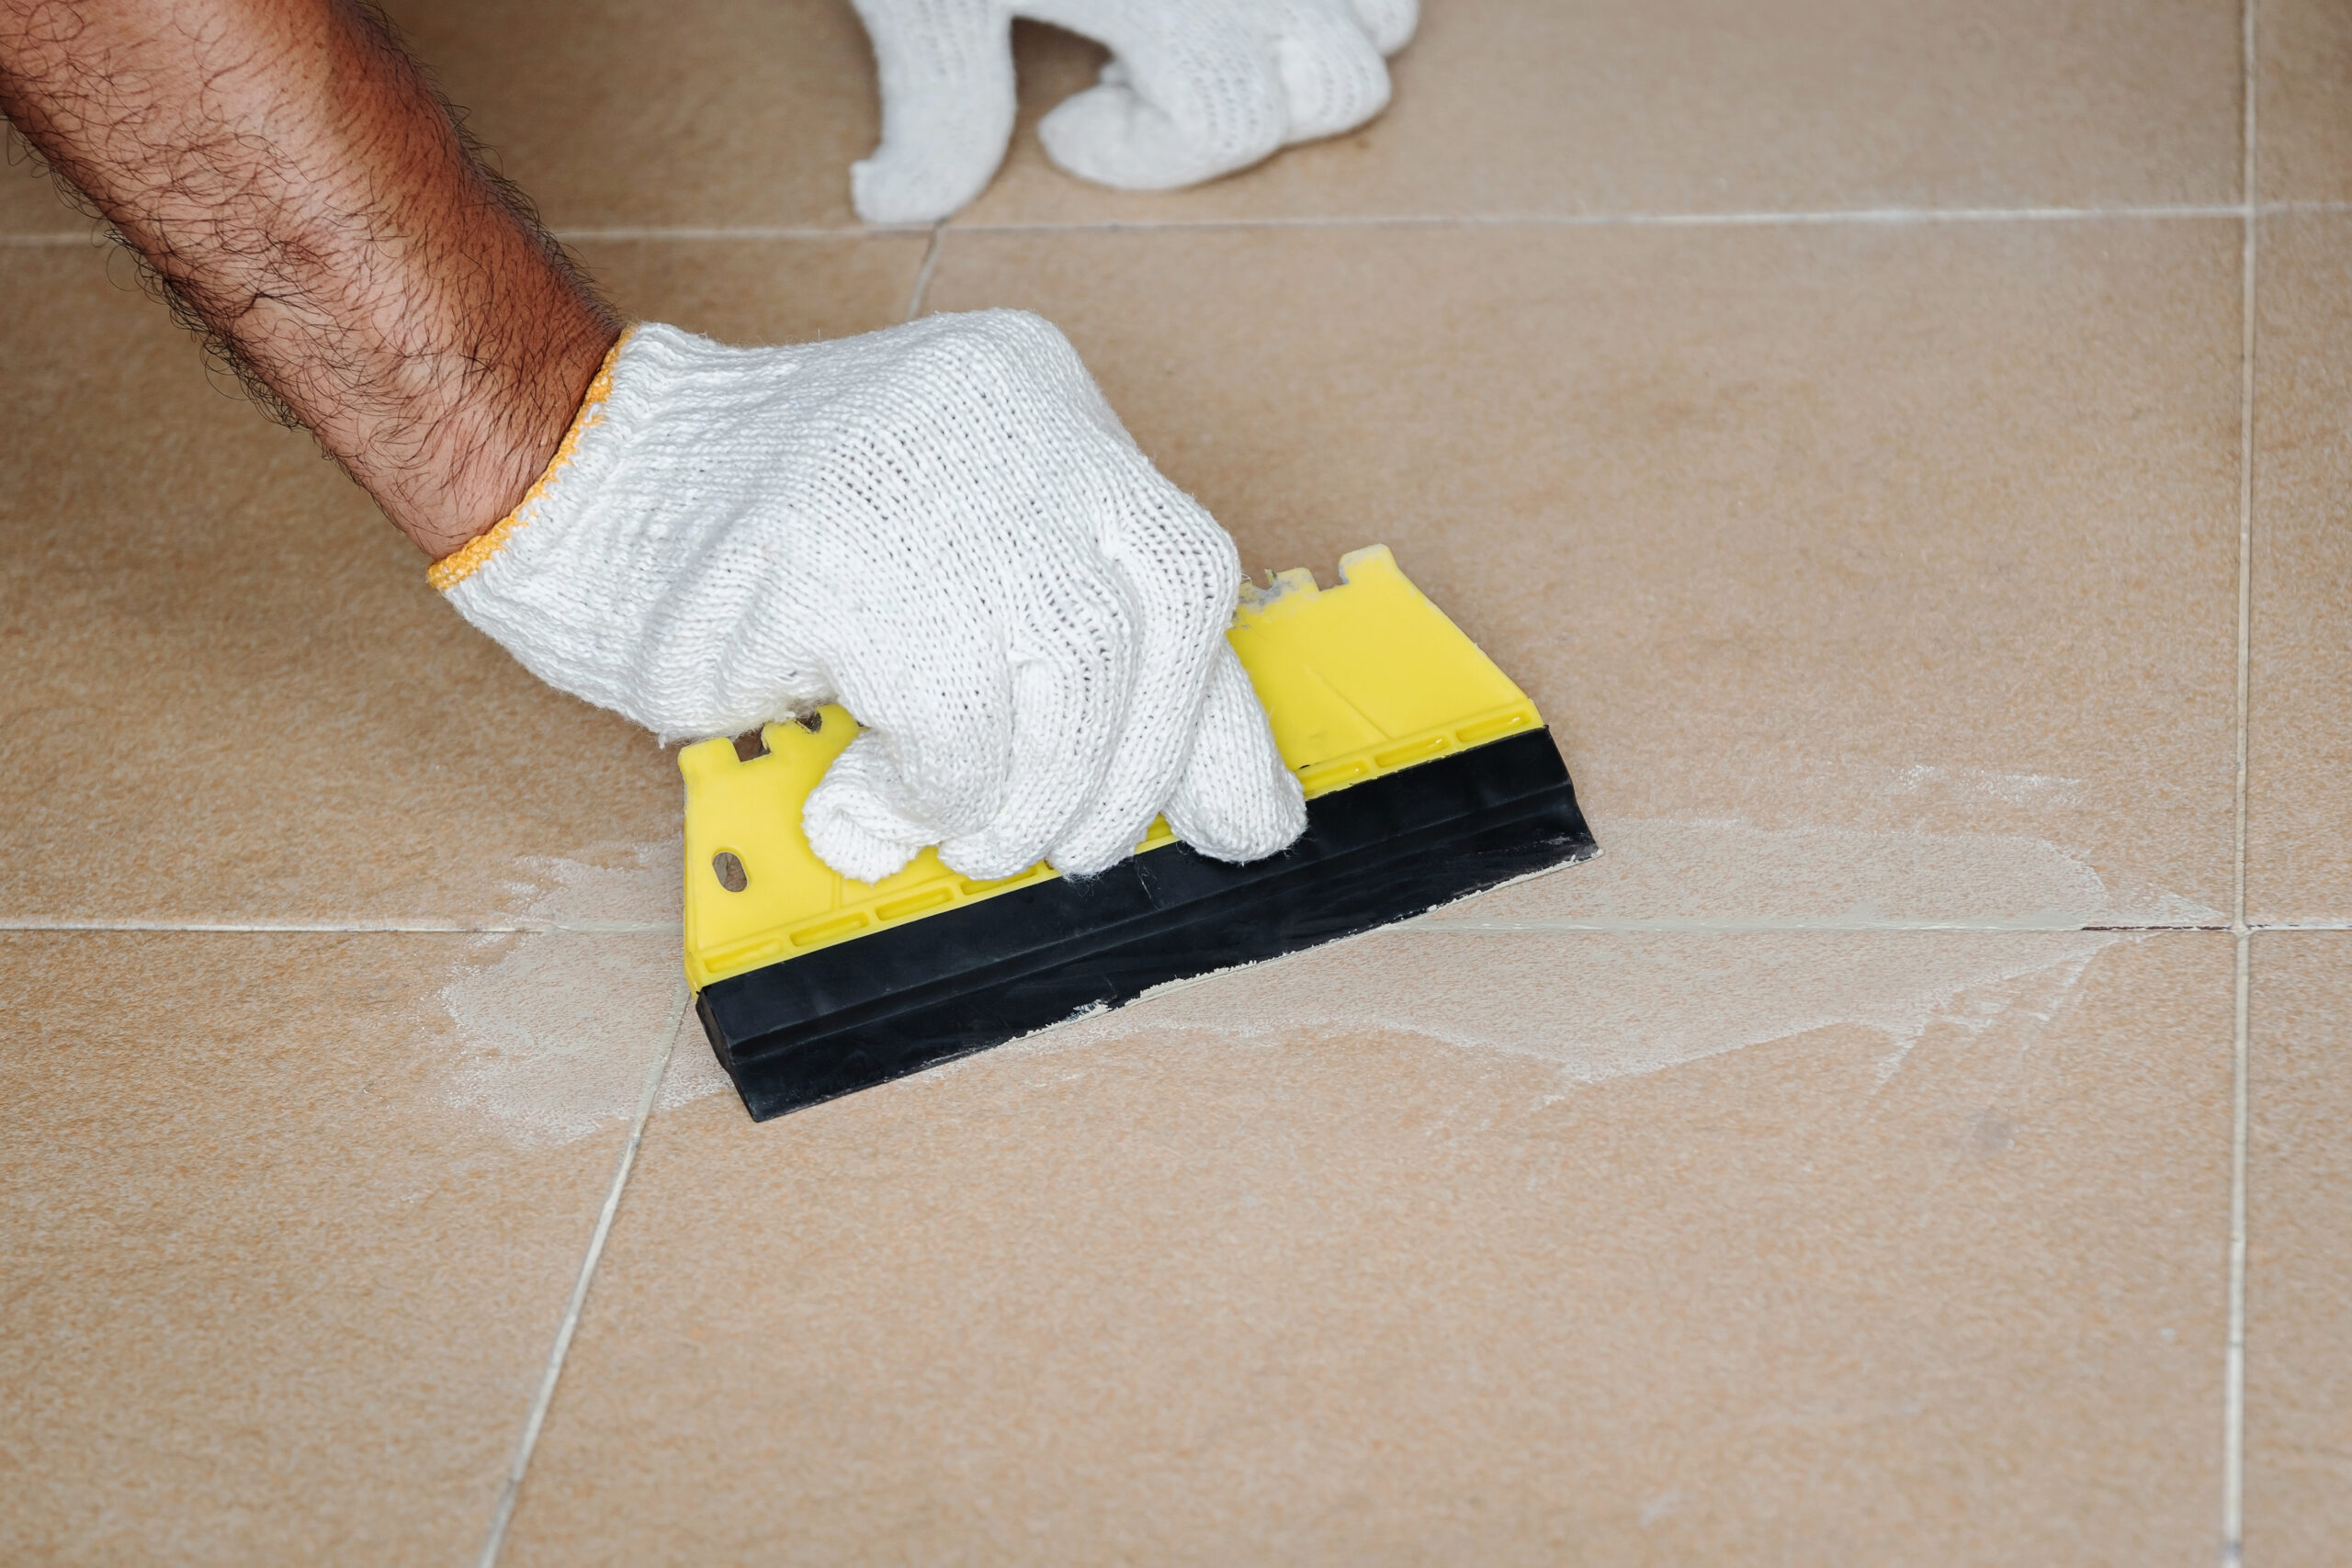 DO-IT-YOURSELF TILE GROUTING